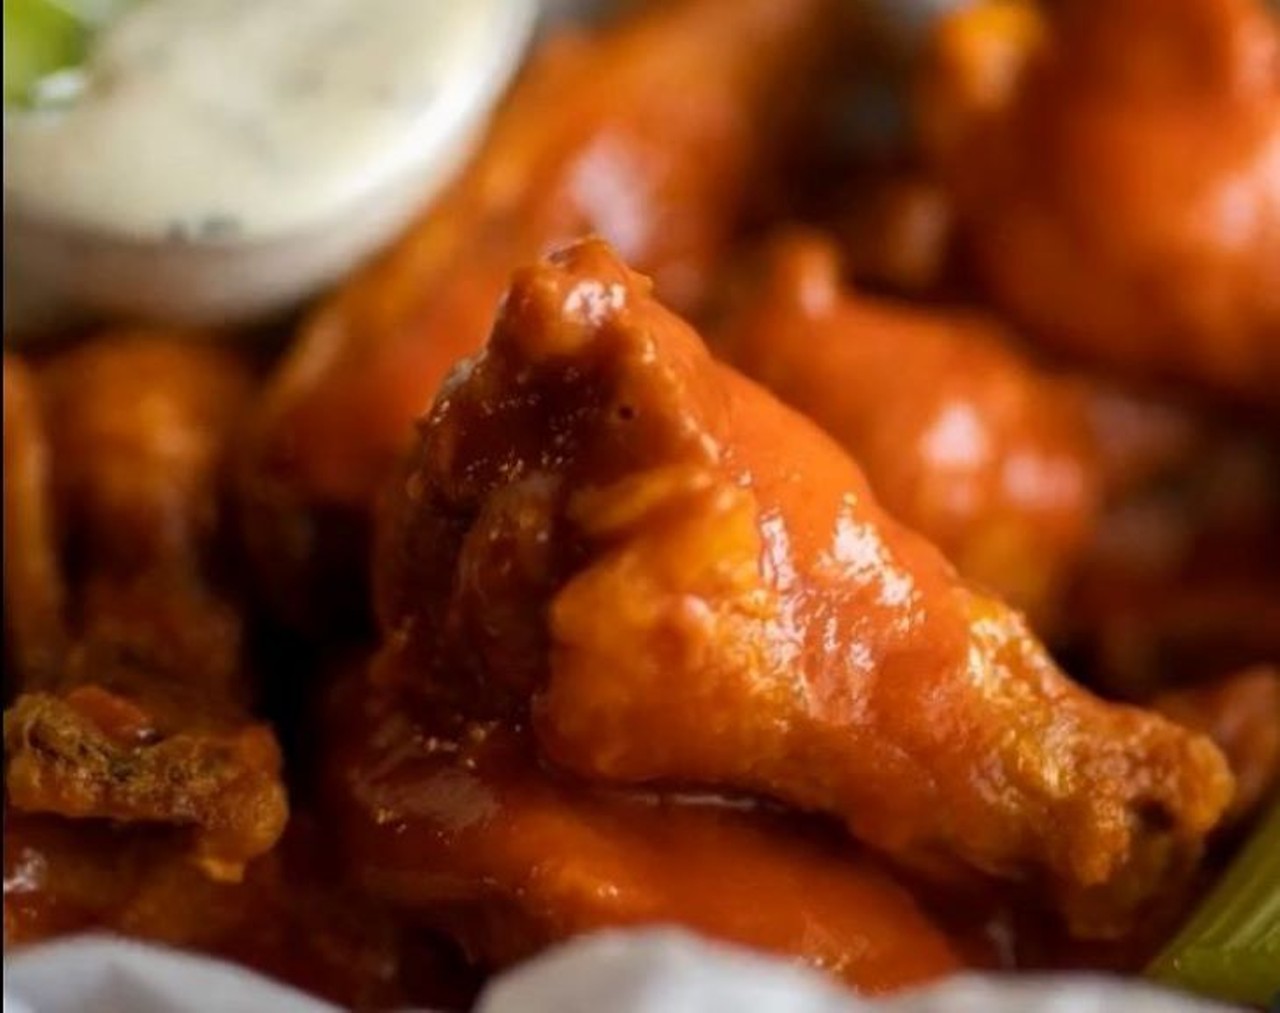 Flyers Wings & Grill 
5621 W. Colonial Drive, 407-297-9464
Established in 1988, Flyers has more options for its wings than you can try in one day. Enjoy their weekly wing specials on Mondays, Tuesdays, Wednesdays and Sundays.
Photo via Flyer&#146;s Wings and Grill on Instagram